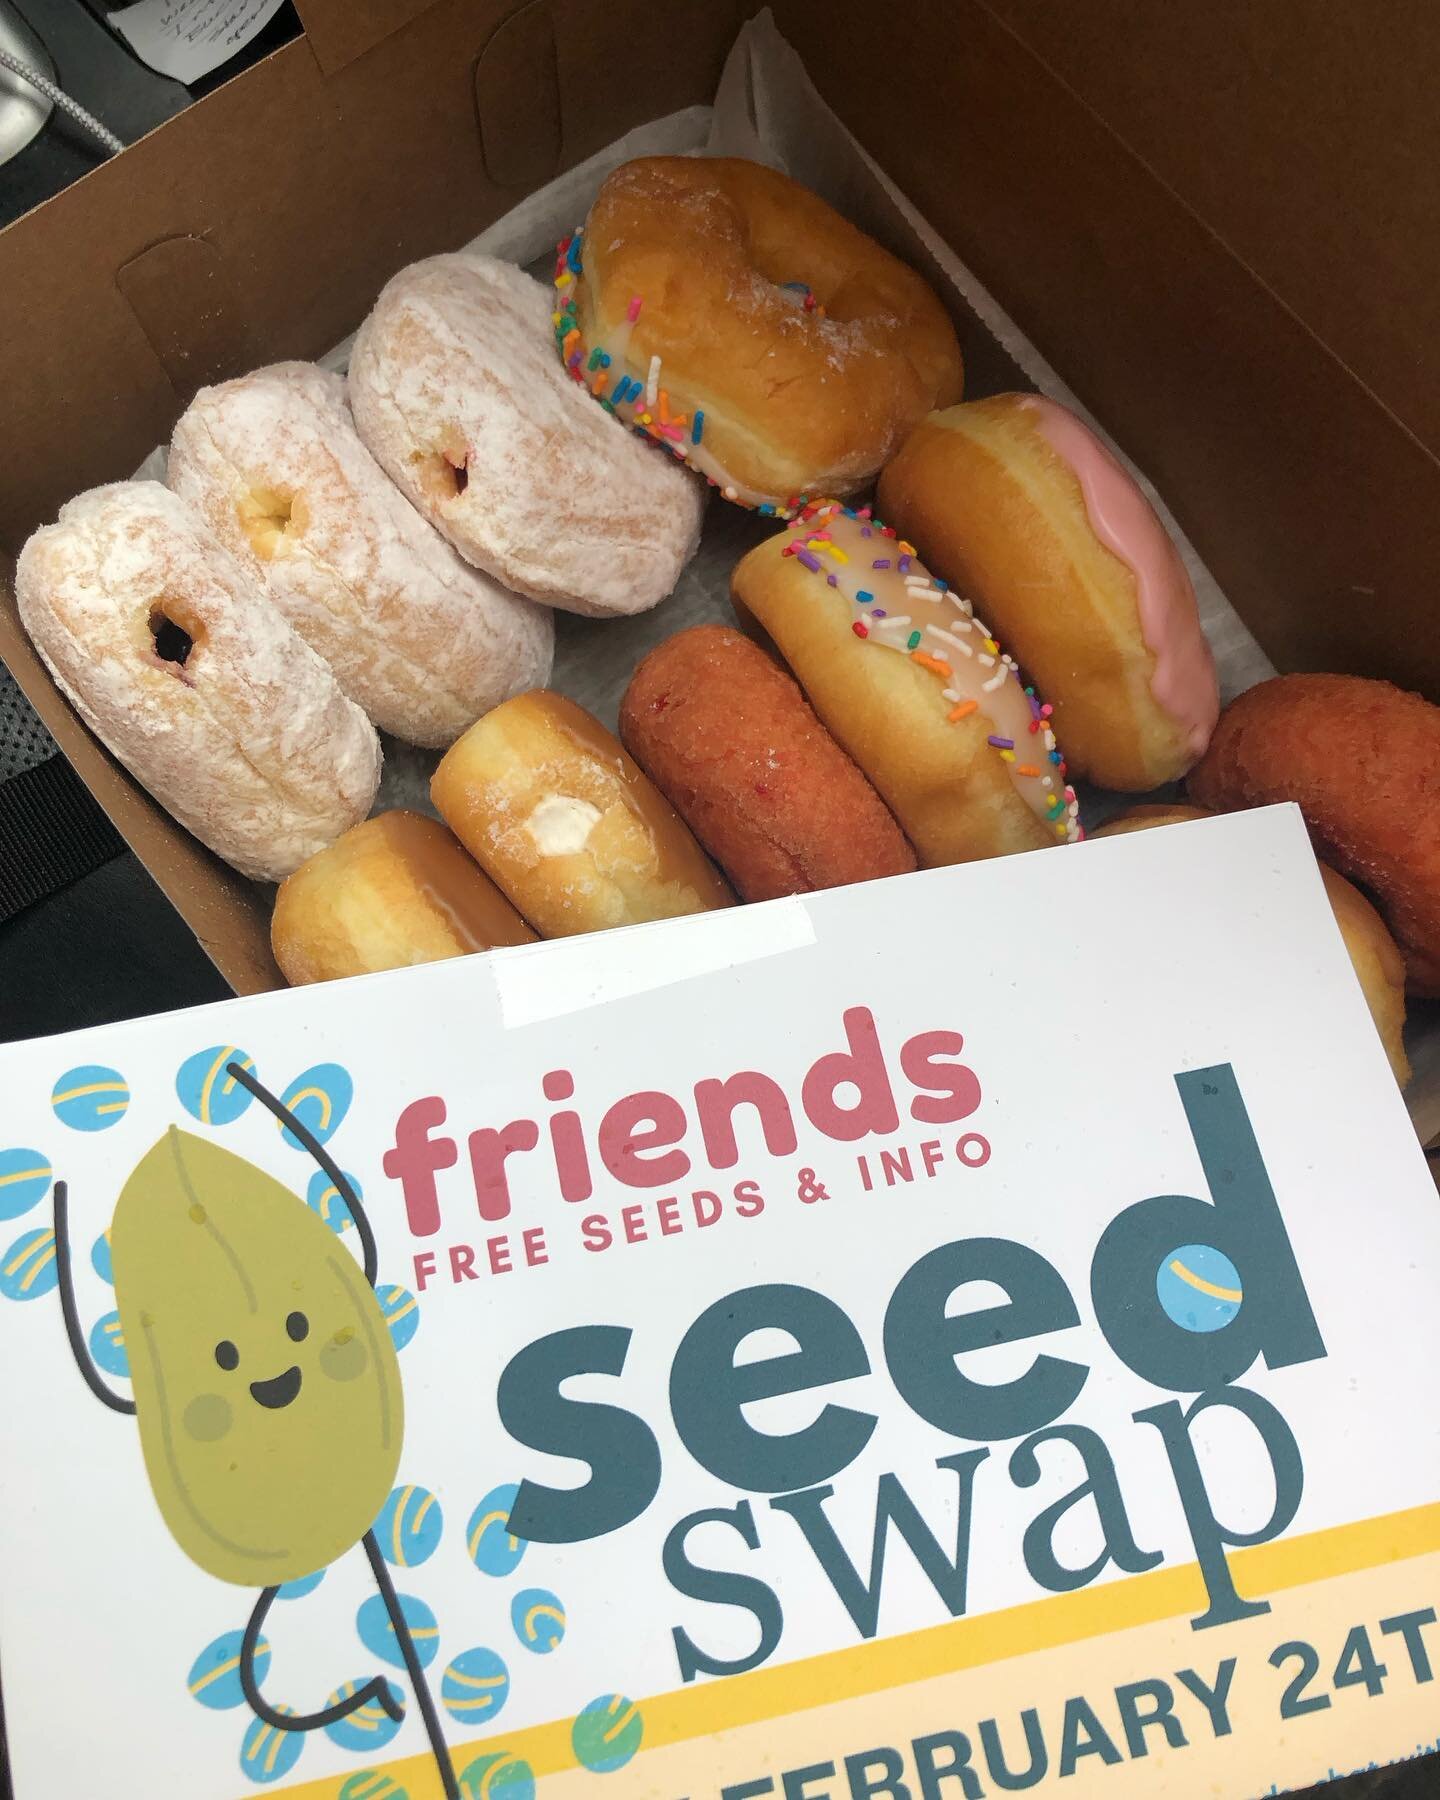 Now that&rsquo;s how you do it friend&mdash; free seeds, new friends, family owned donut shop. thanks for a great time &amp; I&rsquo;m ready to start my seeds #homesteadlife #growyourfood